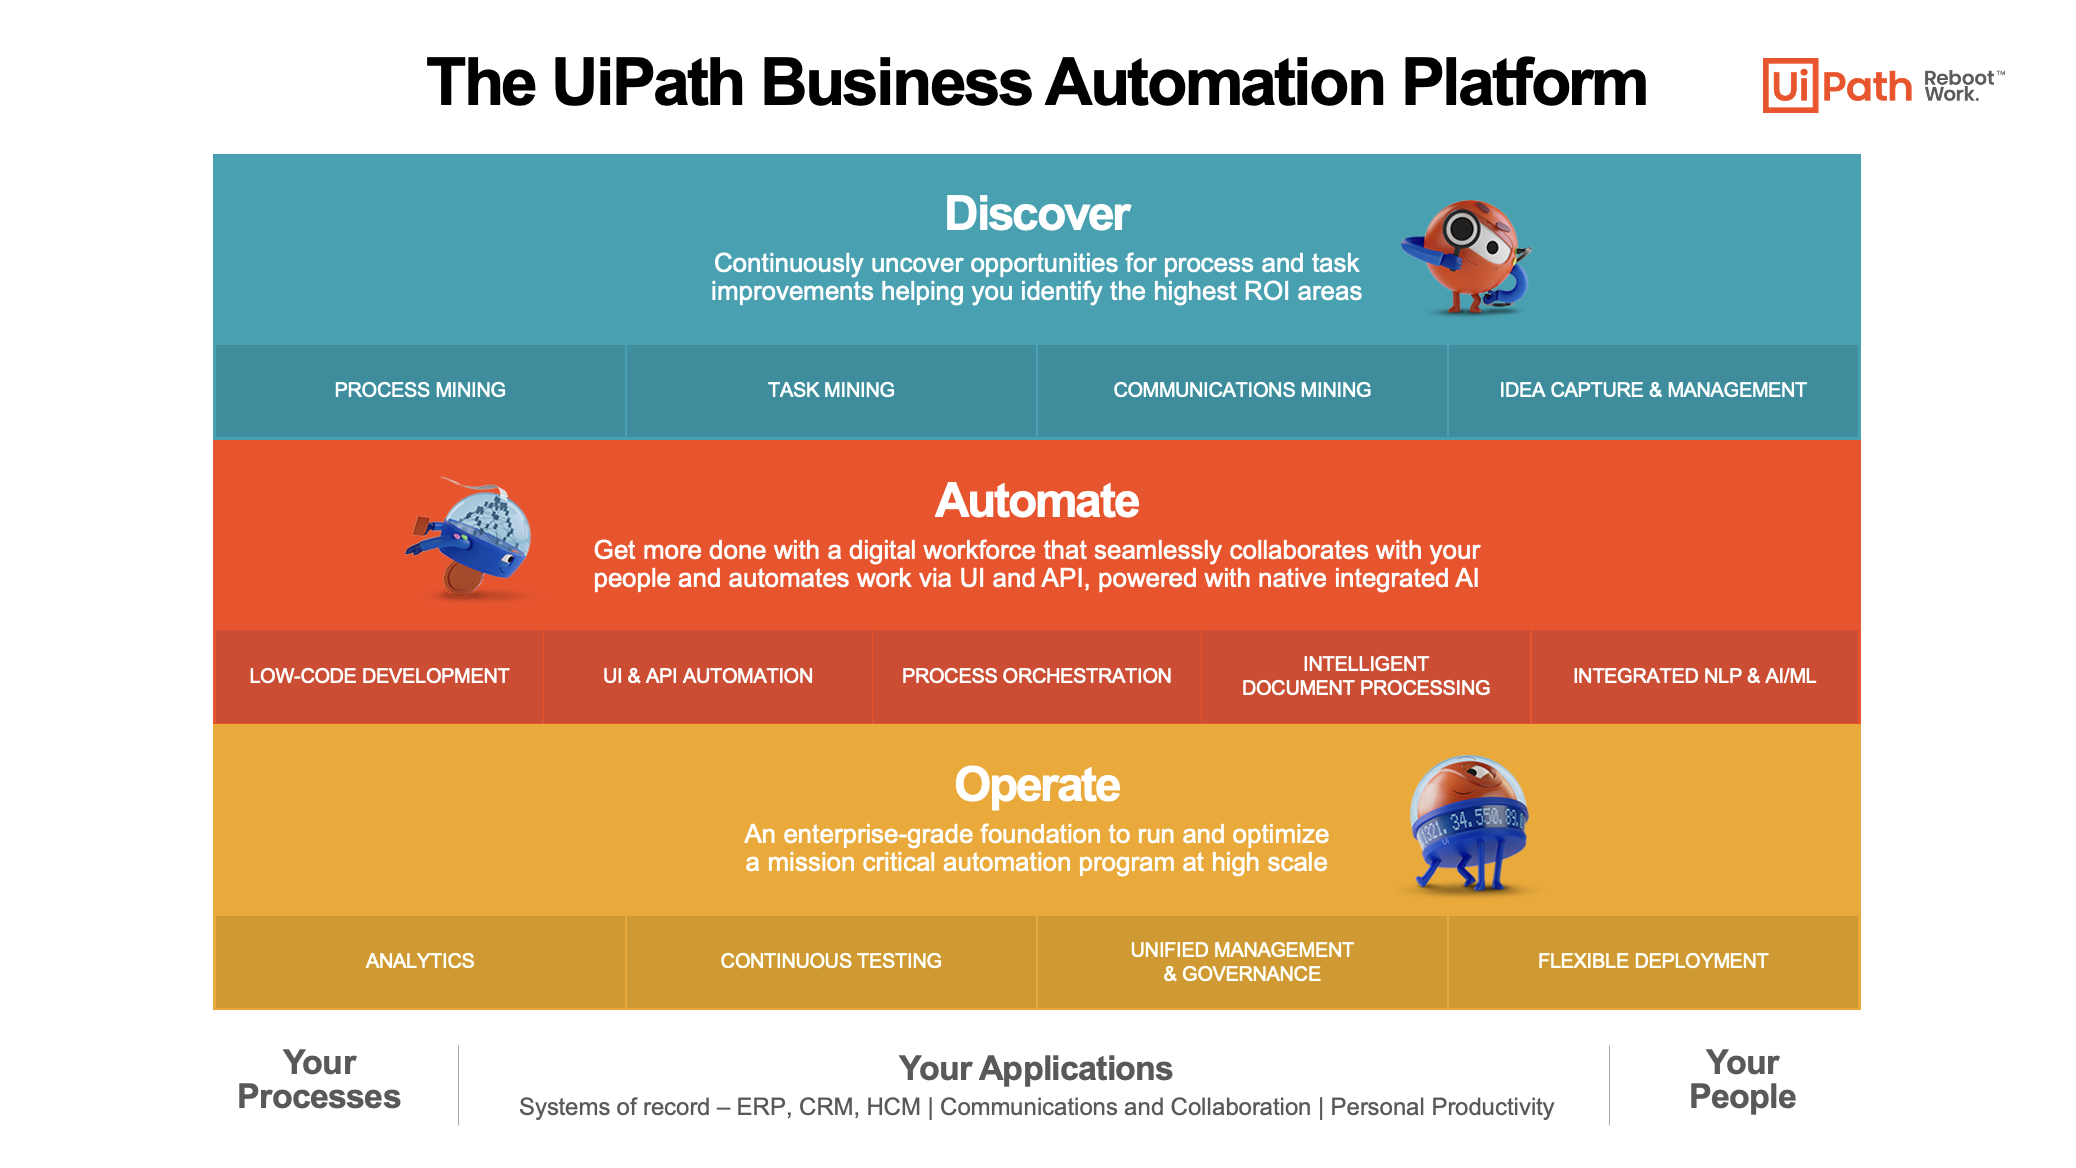 UiPath Business Automation Platform capabilities Discover Automate Operate